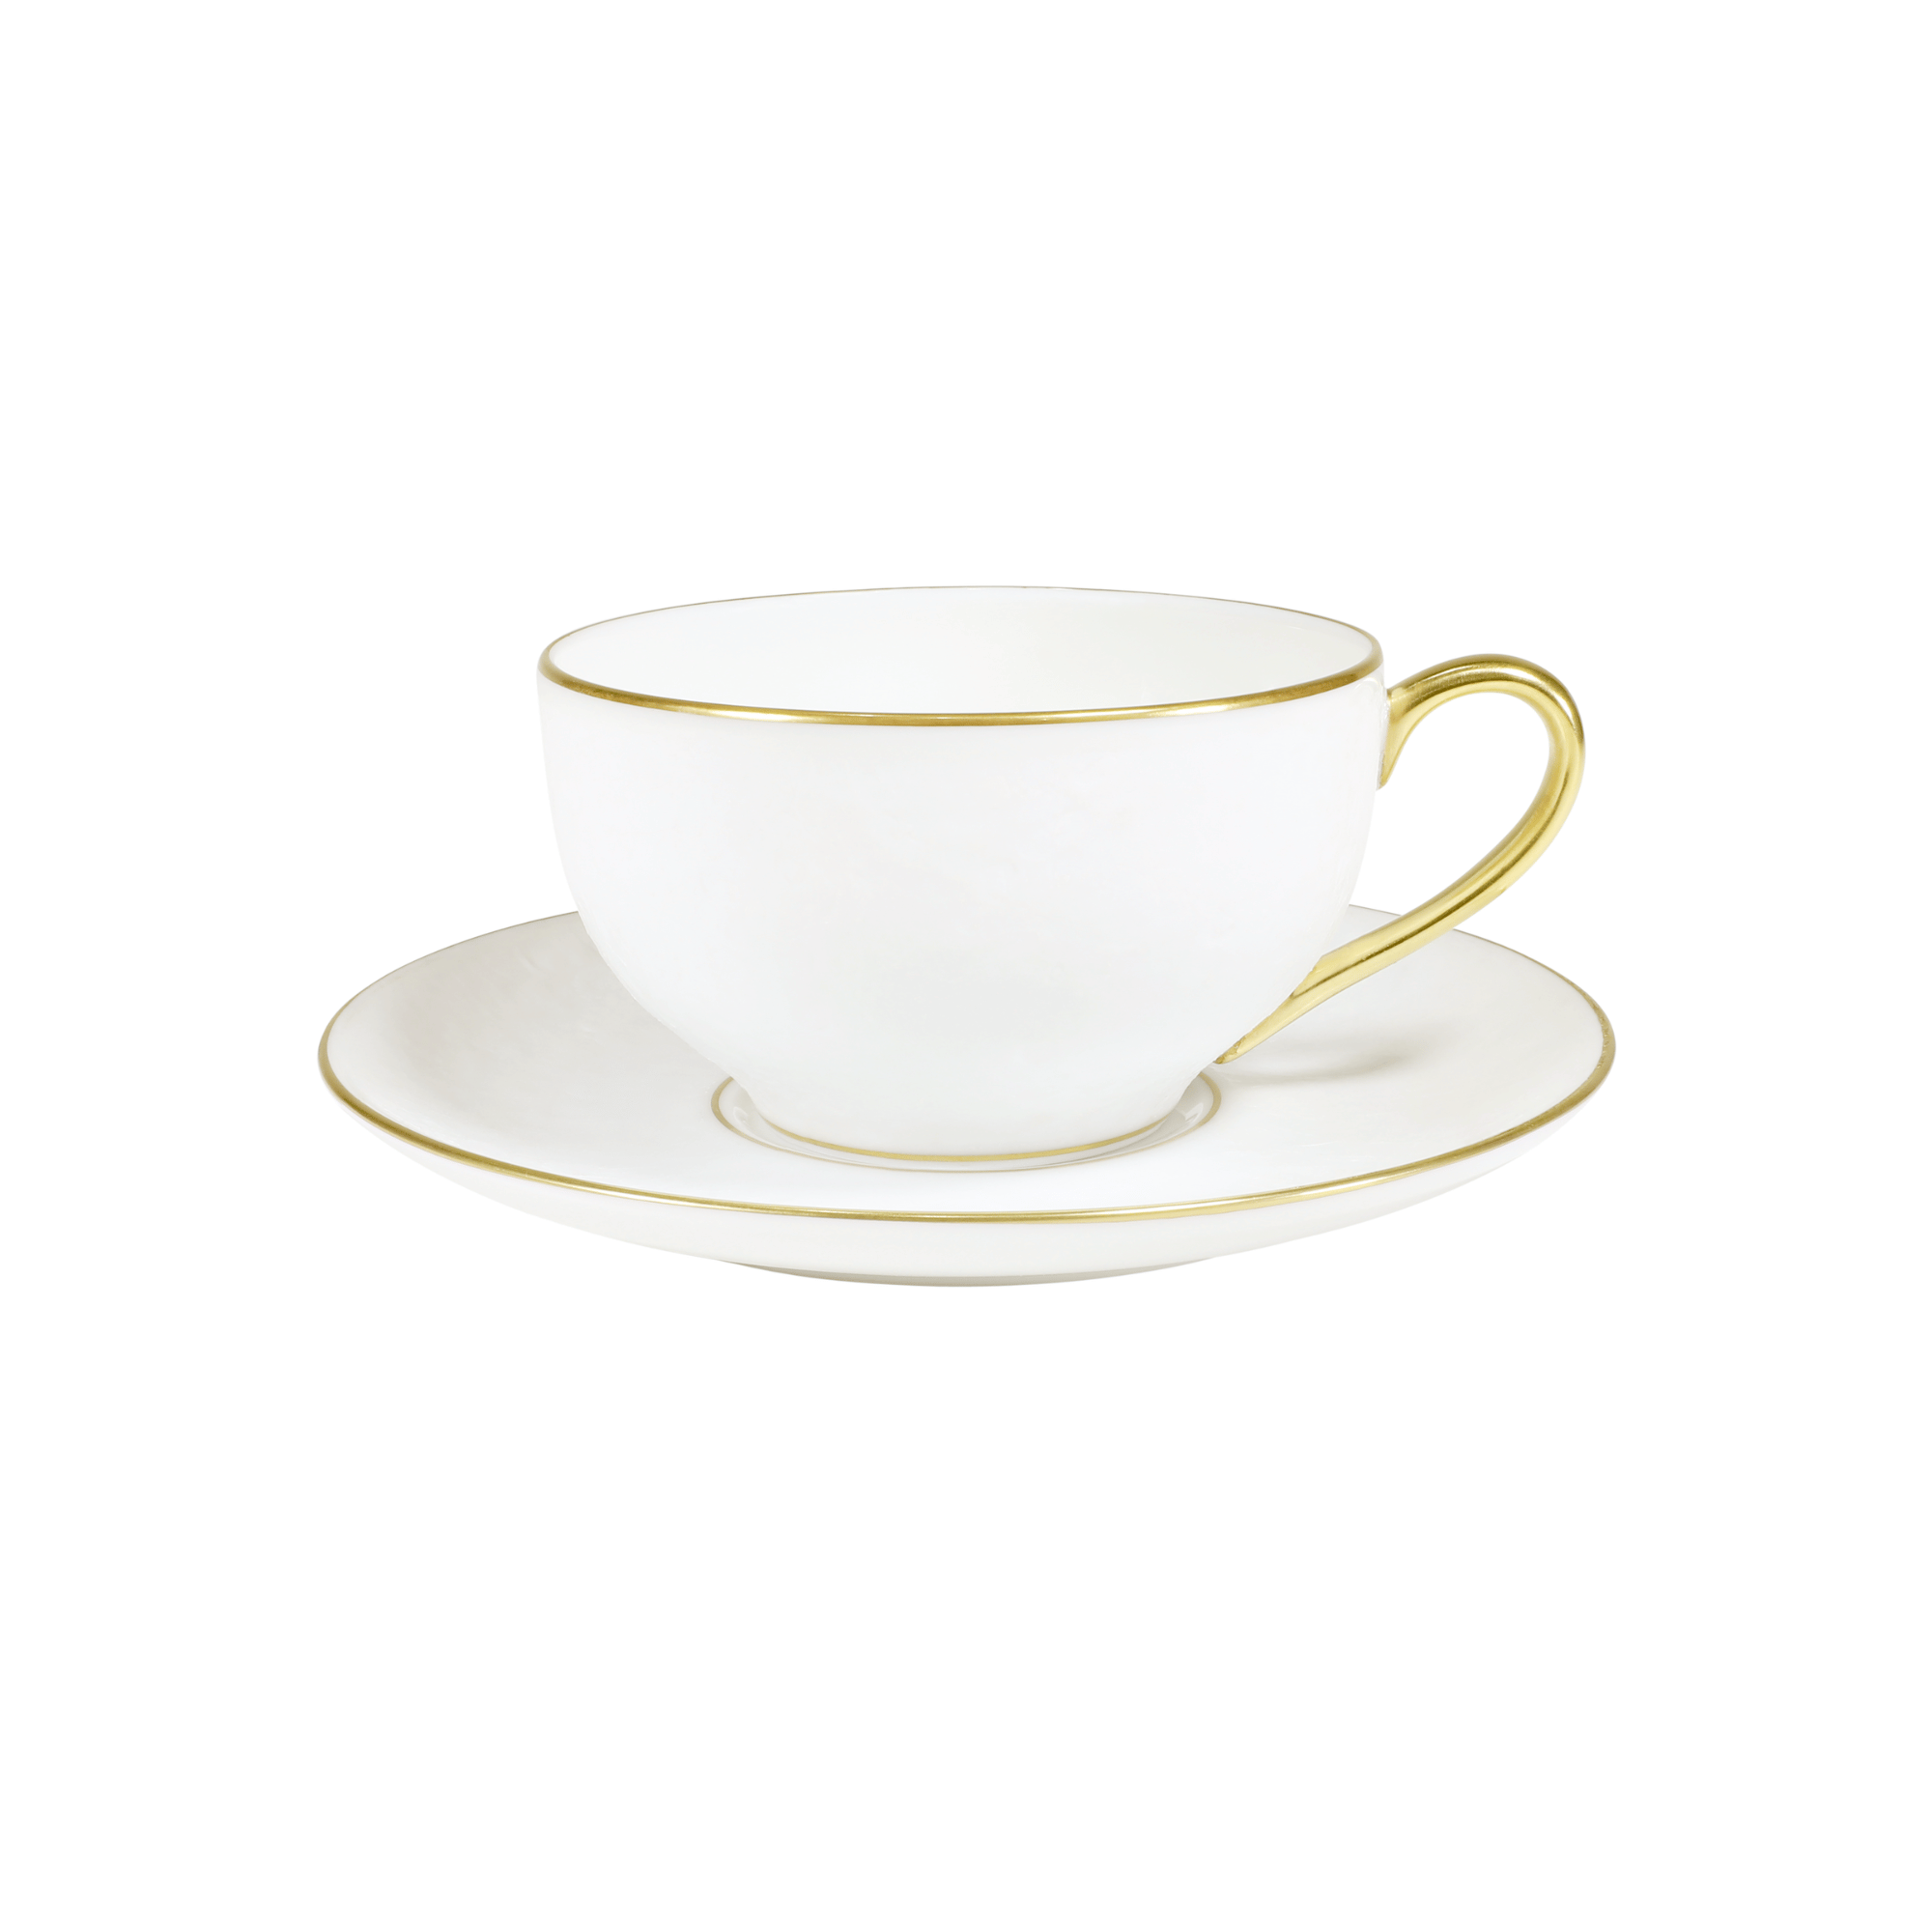 MOONSCAPE ROUND TEA CUP & SAUCER GOLD